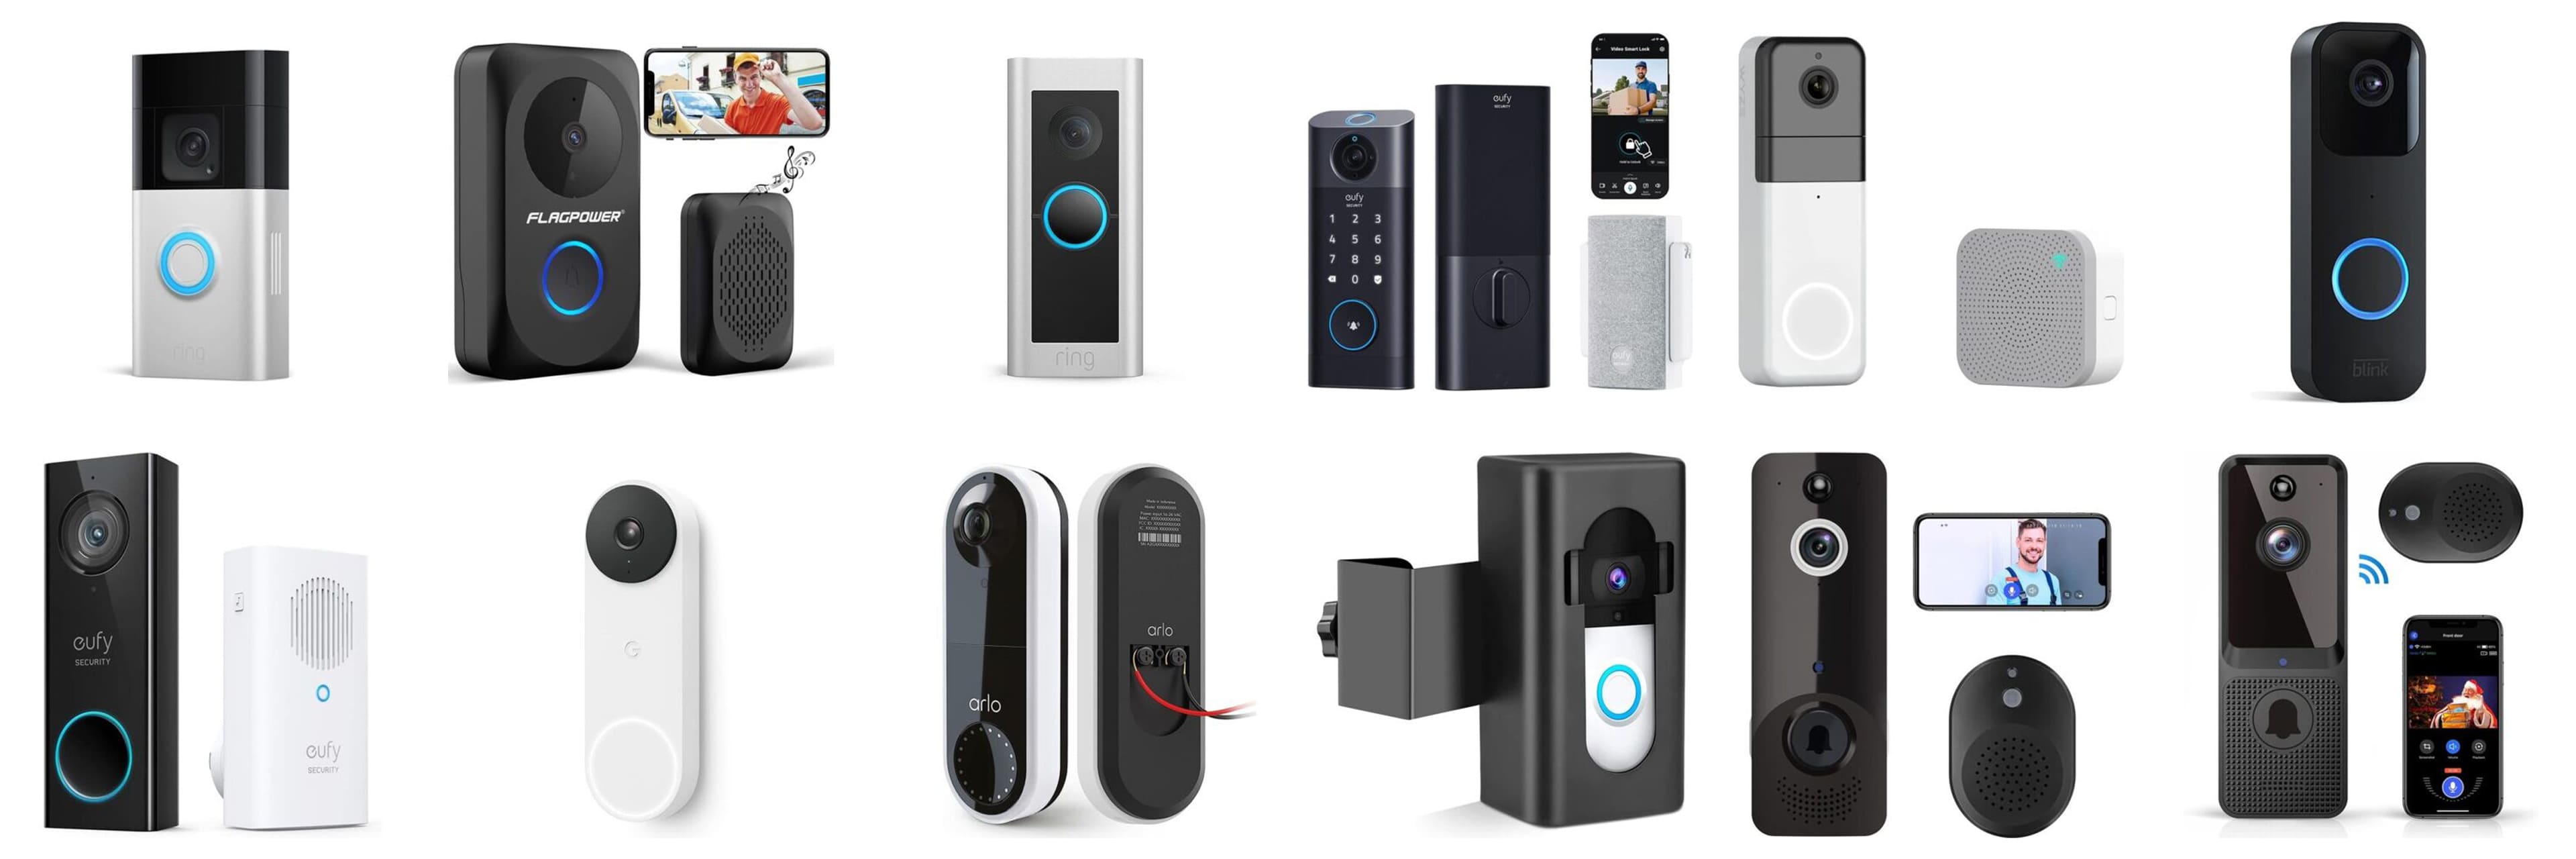 Blink Video Doorbell + Sync Module 2, Two-year battery life, Two-way audio,  HD video, motion and chime app alerts and Alexa enabled - battery or